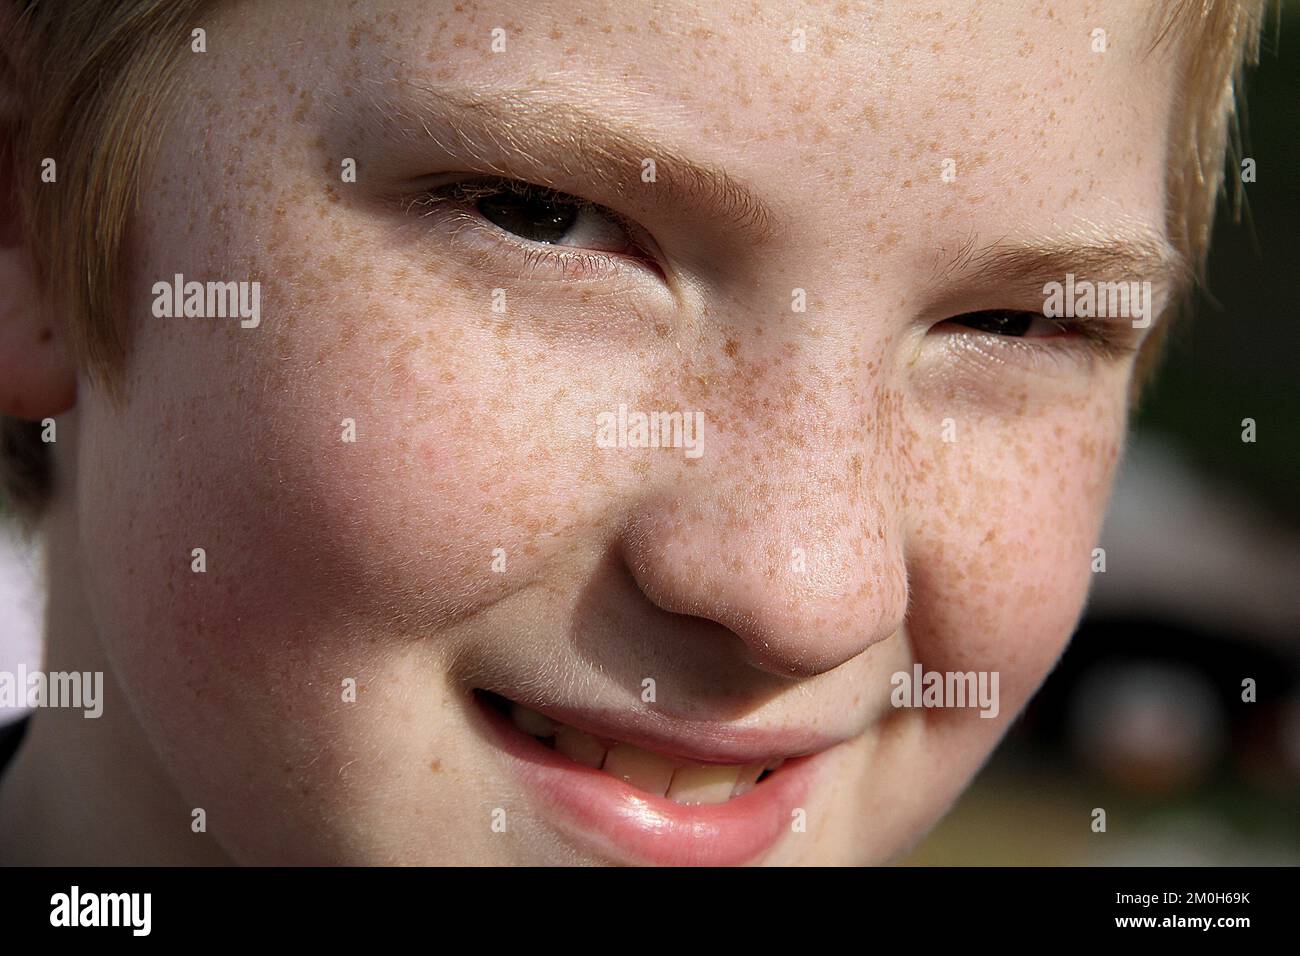 Portrait of young boy with freckles Stock Photo